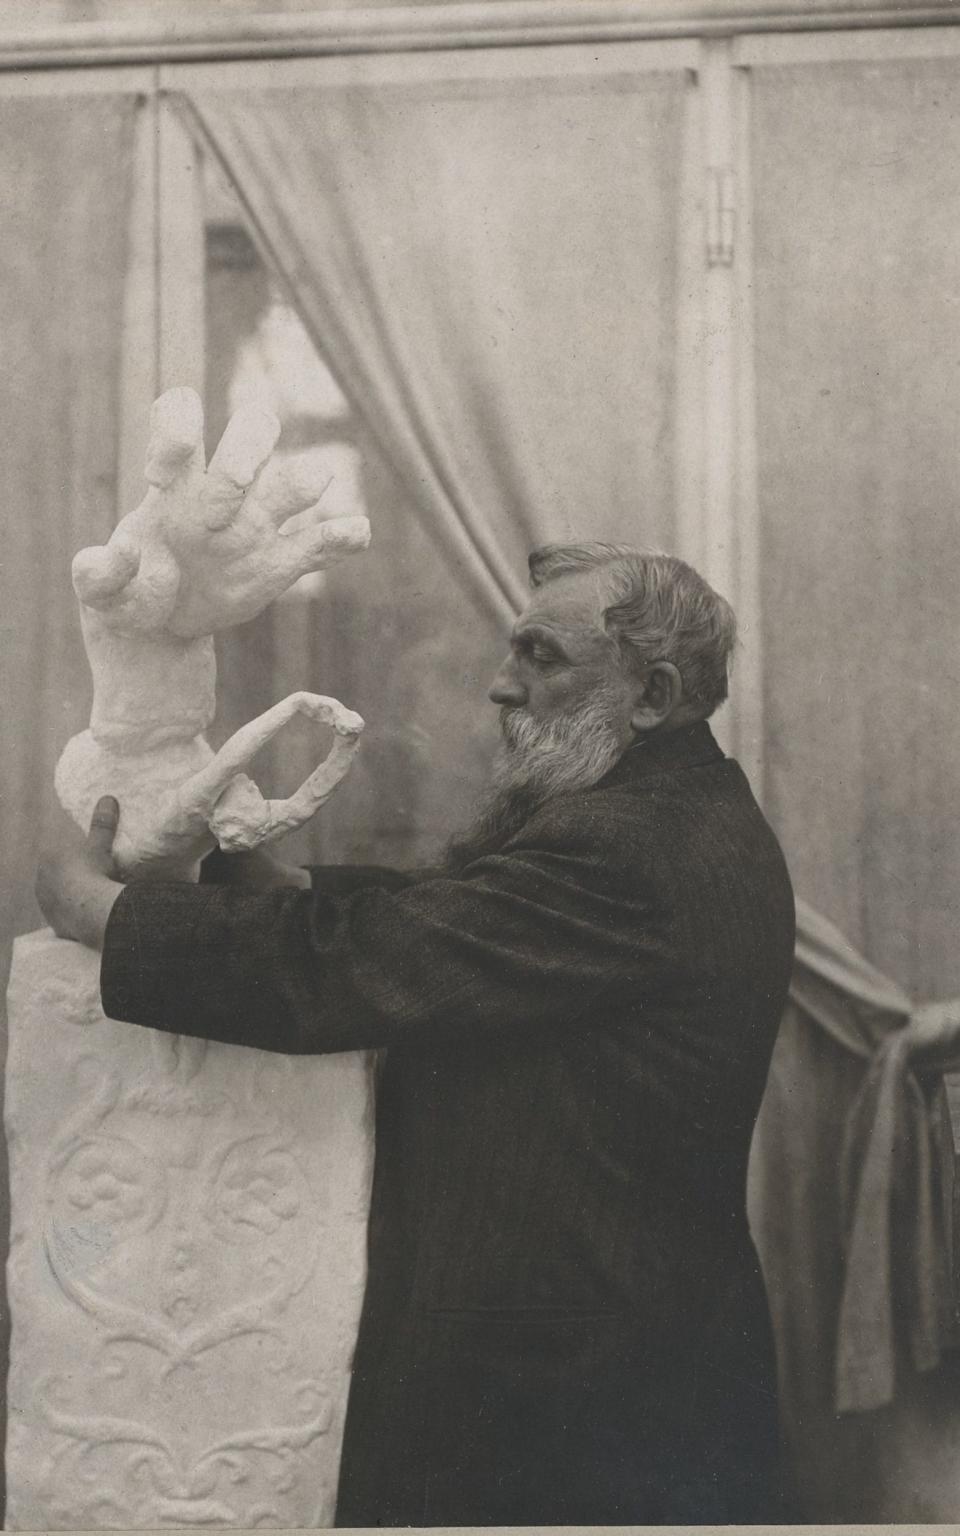 Rodin placing the plaster Clenched Hand with Imploring Figure on a pedestal, in the Pavillon de l’Alma, Meudon, 1906 - Musée Rodin